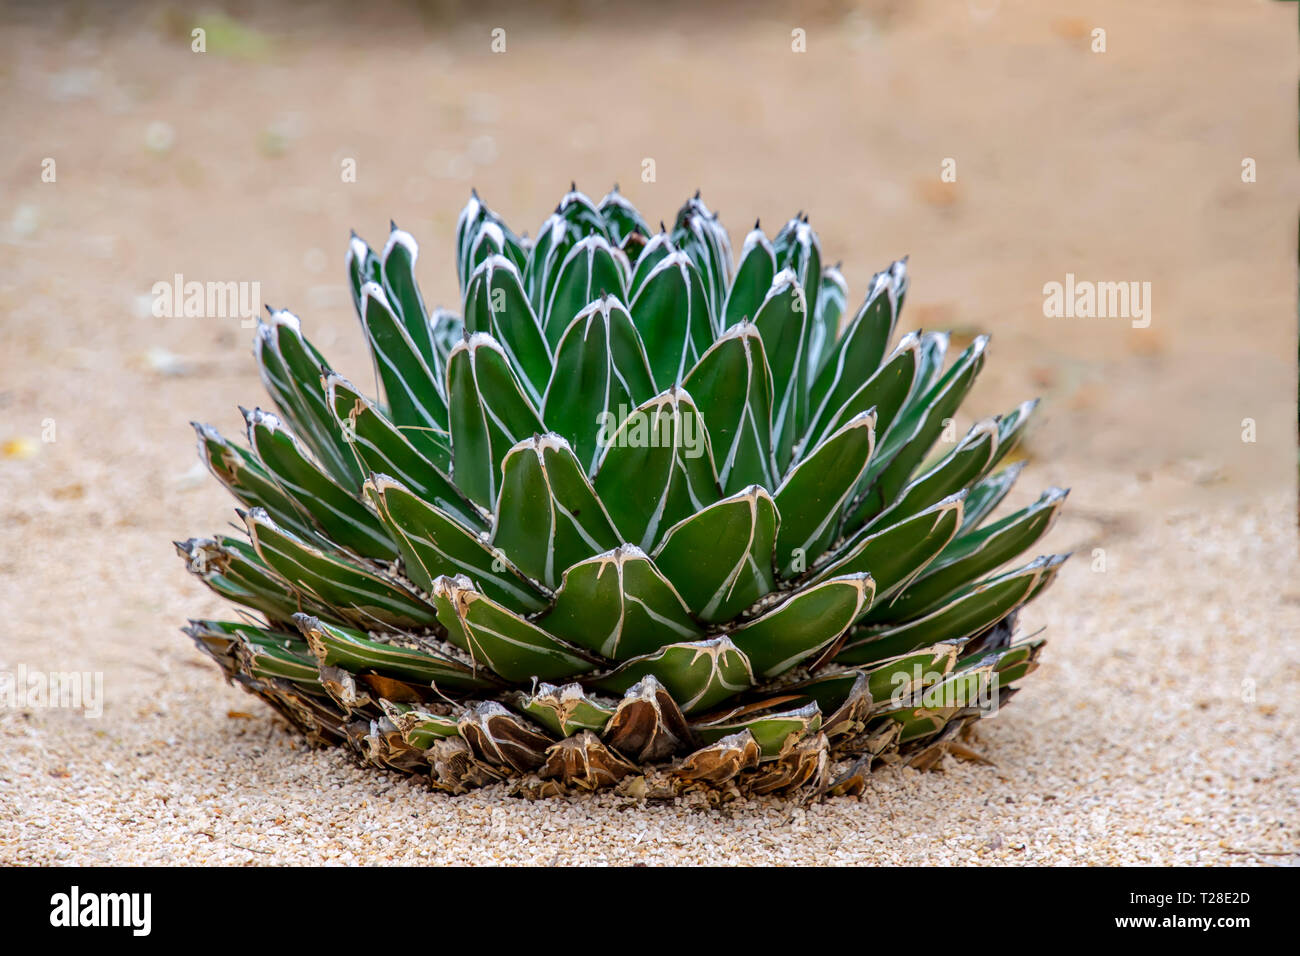 Sukulent agave victoriae growing in white sand close up Stock Photo